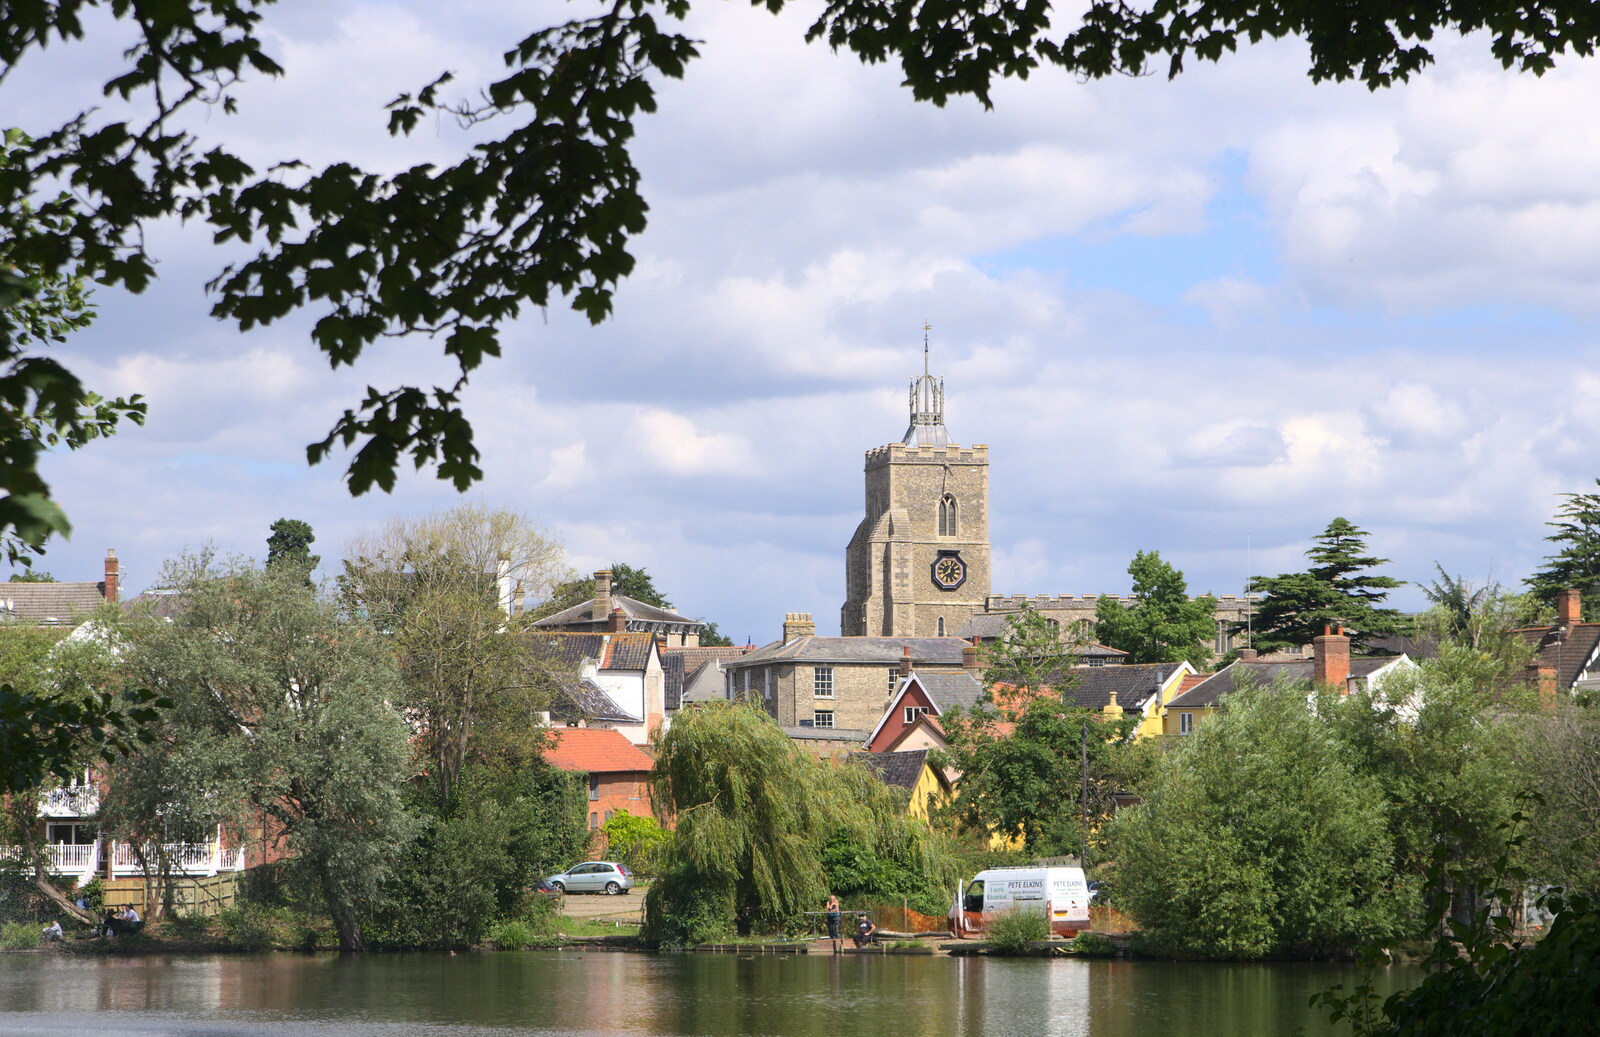 St. Mary's Church over the Mere from A Race For Life, The Park, Diss, Norfolk - 16th August 2015